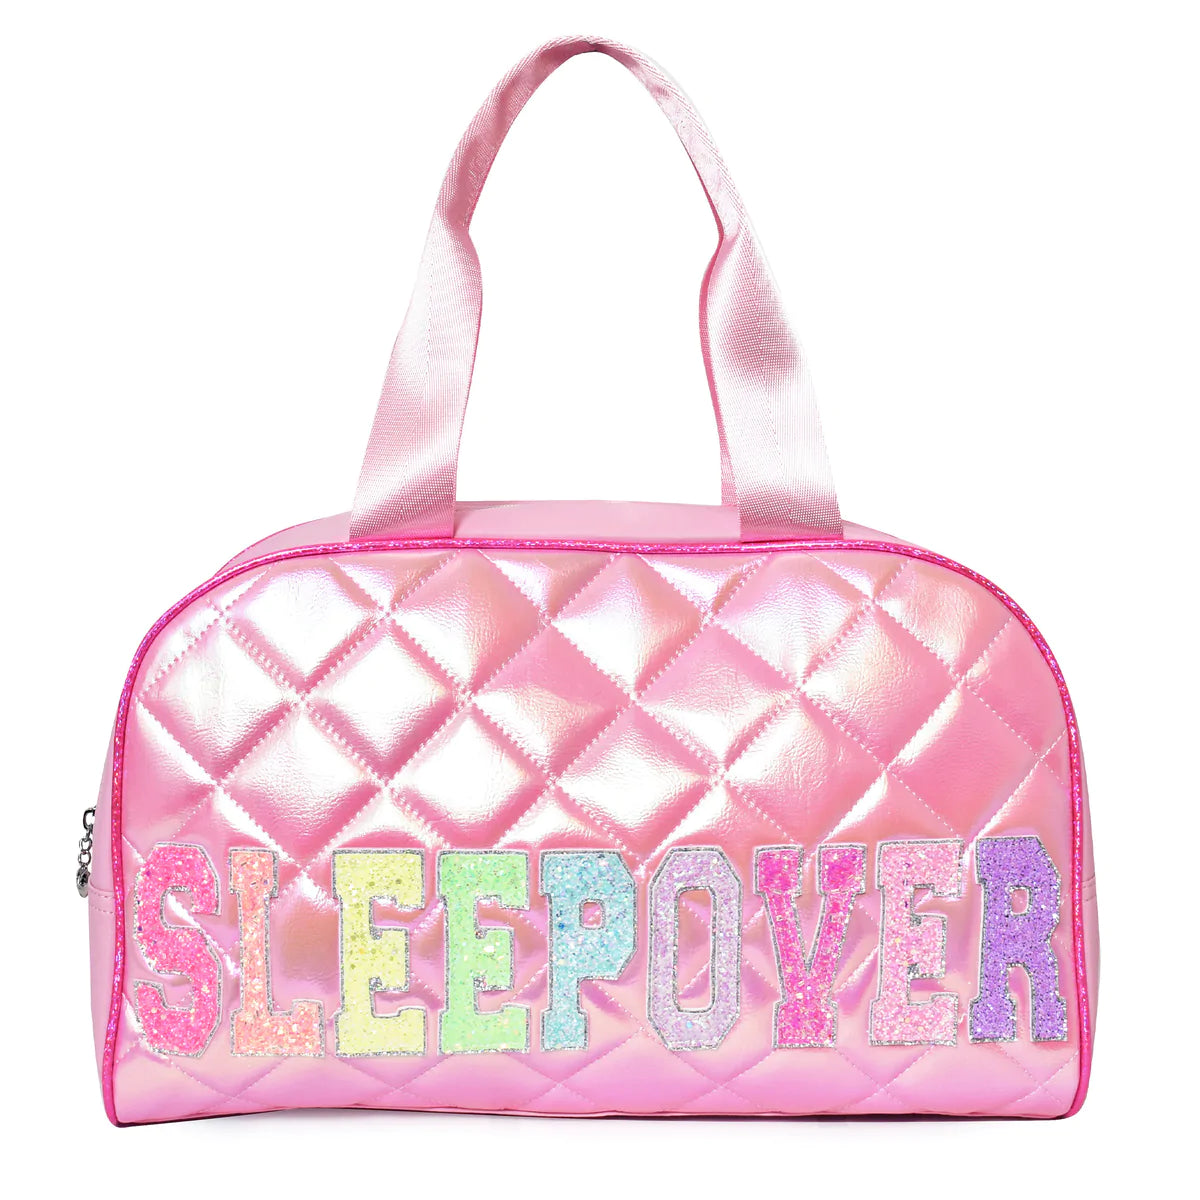 OMG Accessories - 'Sleepover' Quilted Puffer Large Duffle Bag